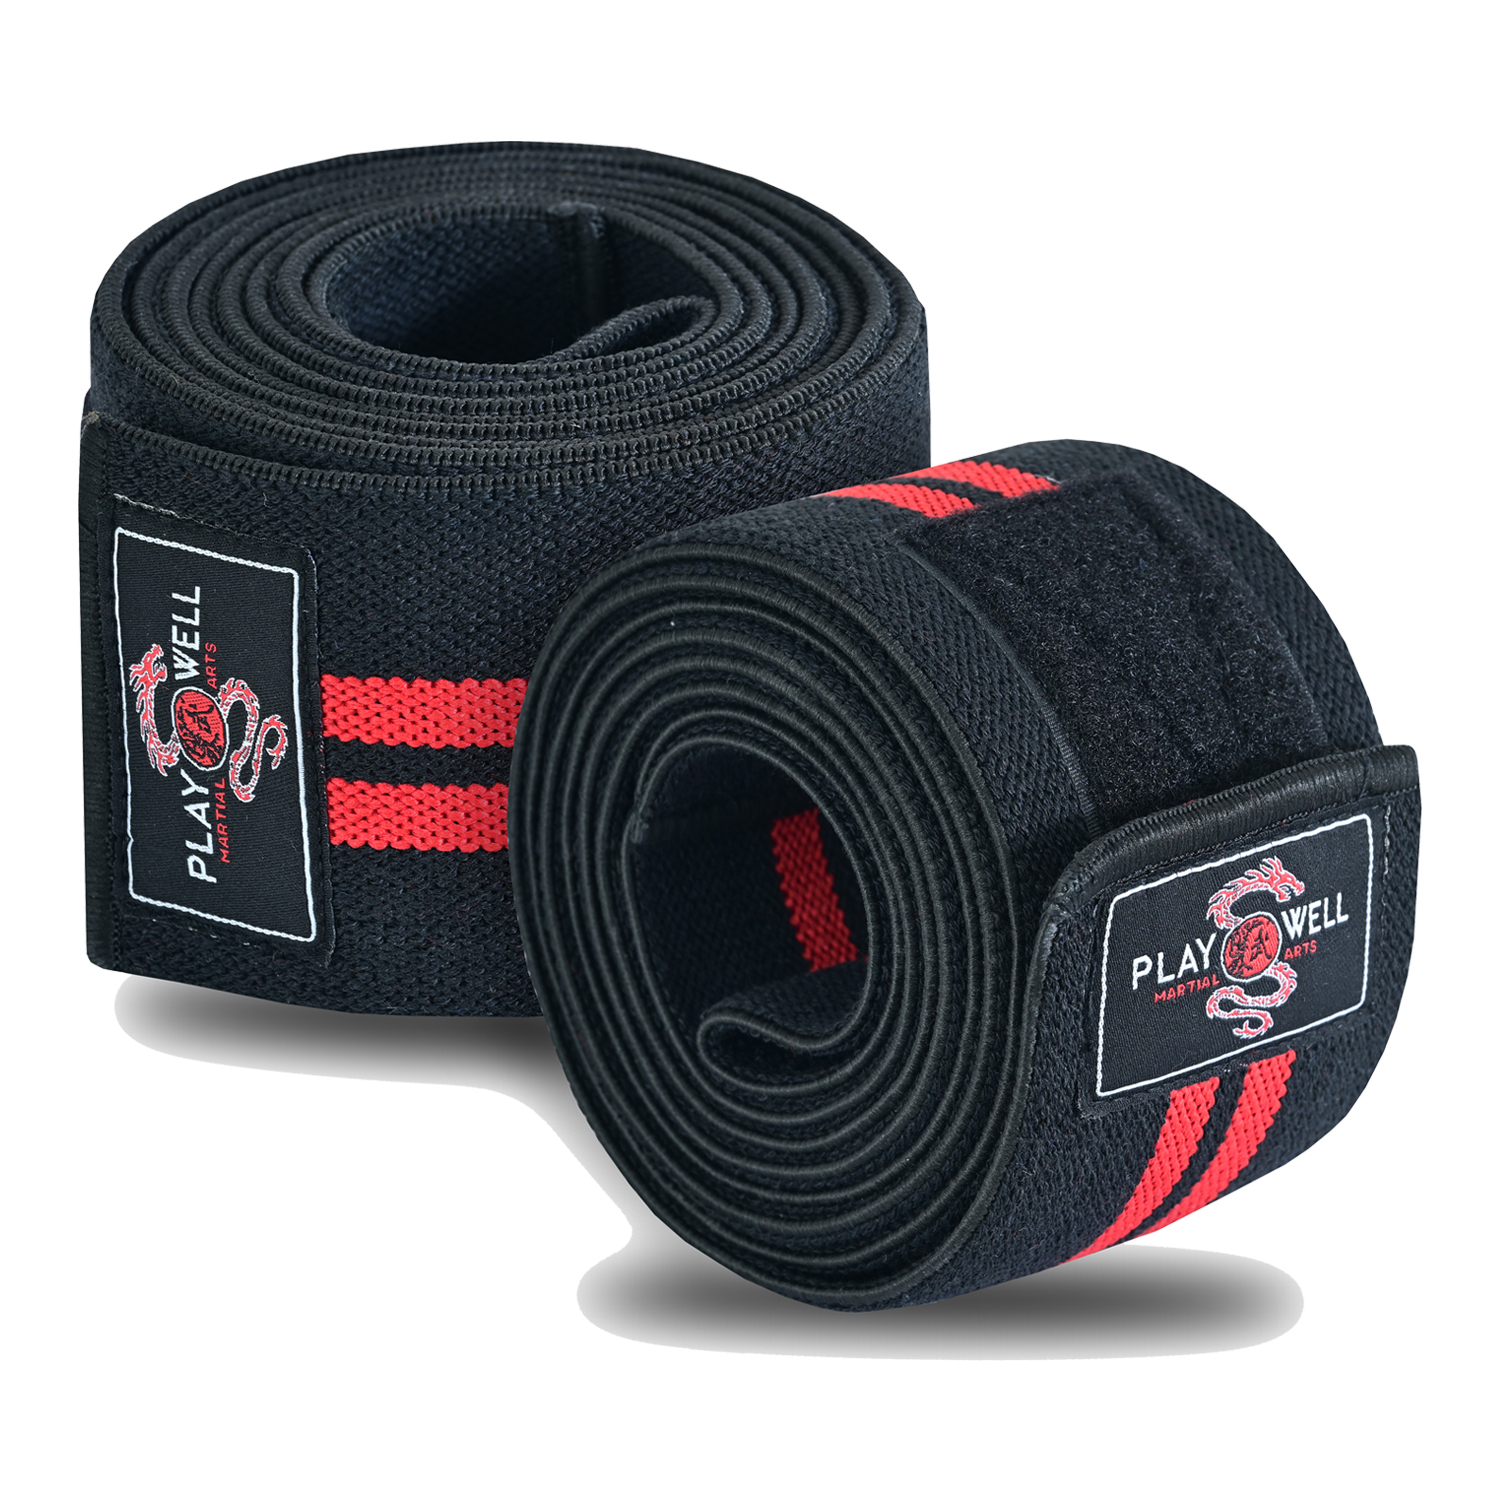 Pro Weight Training Range: Weight Lifting Knee Wraps - Click Image to Close